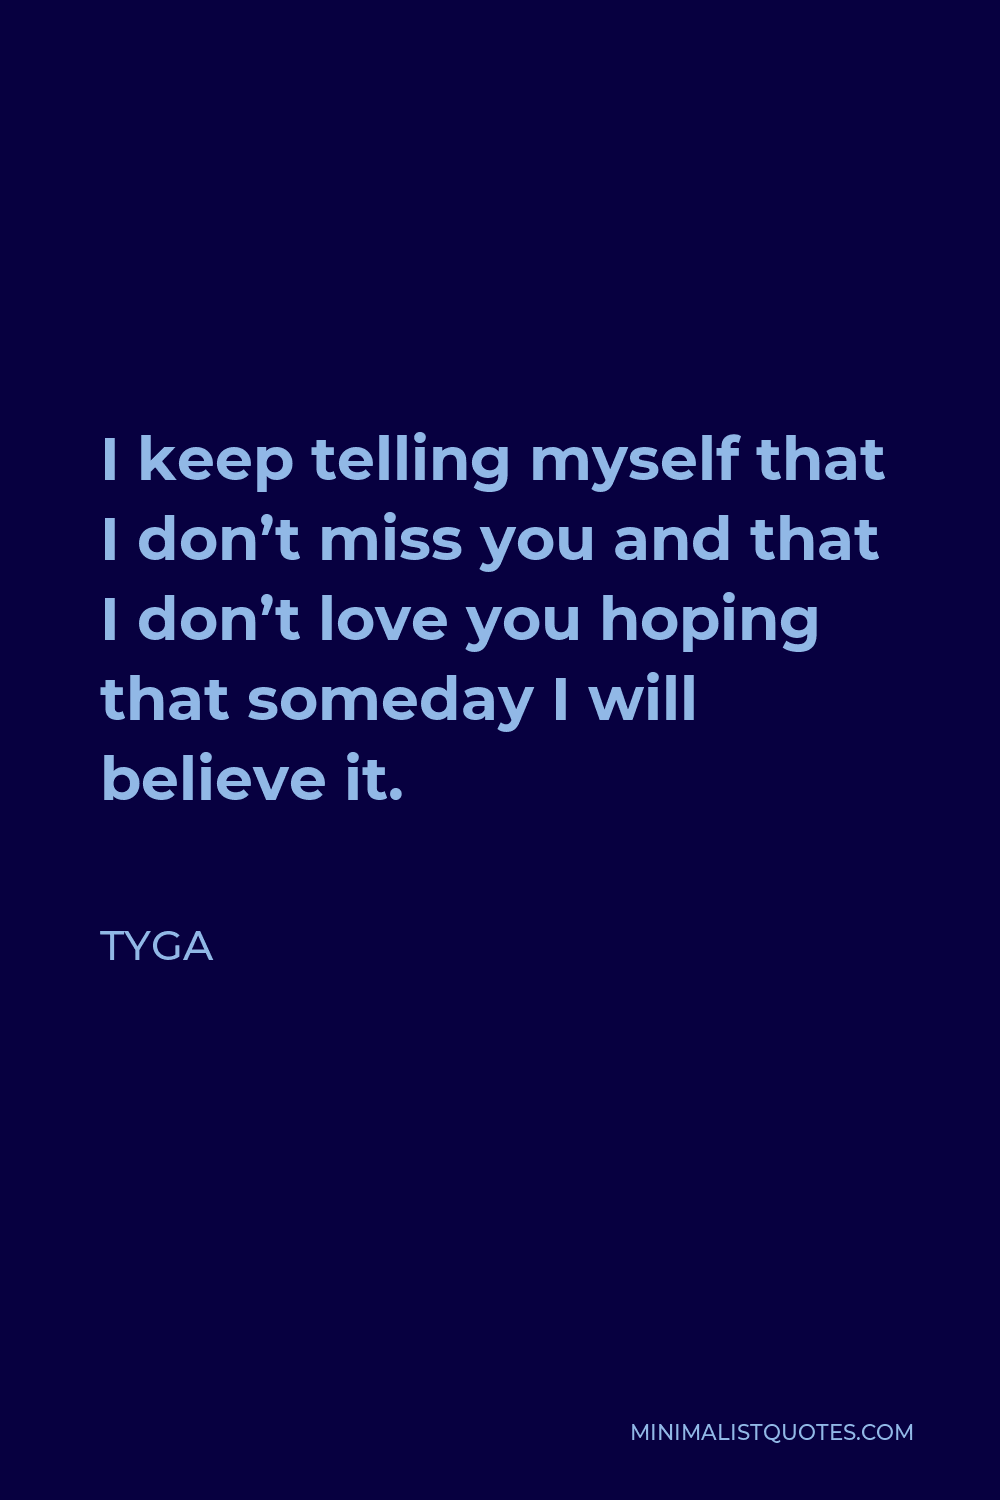 Tyga Quote - I keep telling myself that I don’t miss you and that I don’t love you hoping that someday I will believe it.